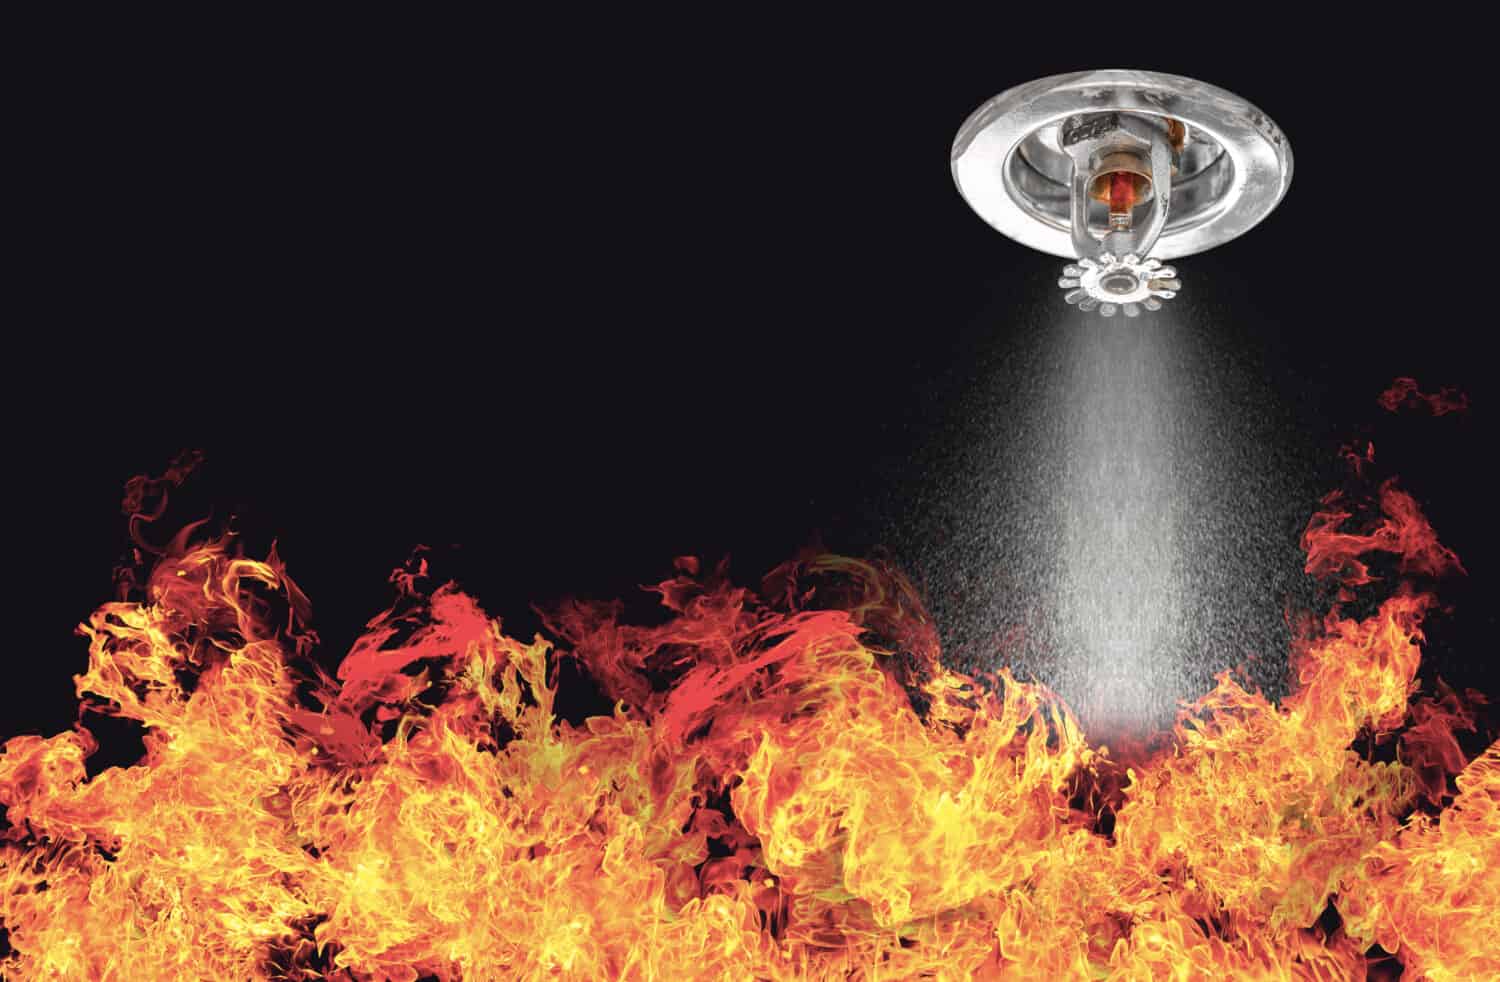 Image of Fire Sprinklers Spraying with fire background. Fire sprinklers are part of an overall safety protocol for fire and life safety.